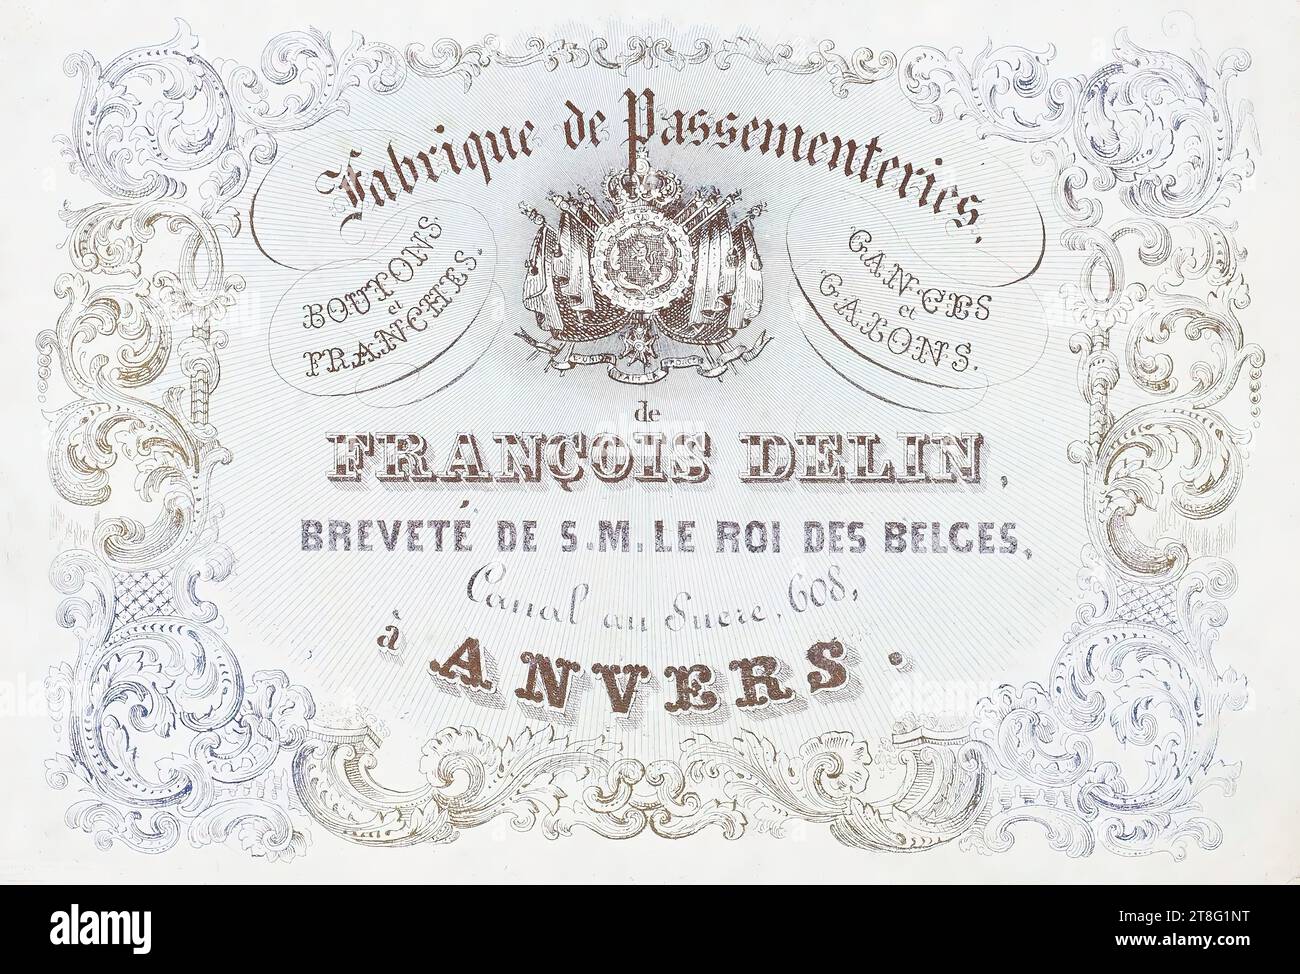 Advertising printing. Trimmings factory. BUTTONS, and, FRANCHES. GANCES, and, GAXONS. of, FRANÇOIS DELIN, PATENTED BY H.M. THE KING OF THE BELGIANS, Canal au Sucre, 608, in ANTWERP Stock Photo